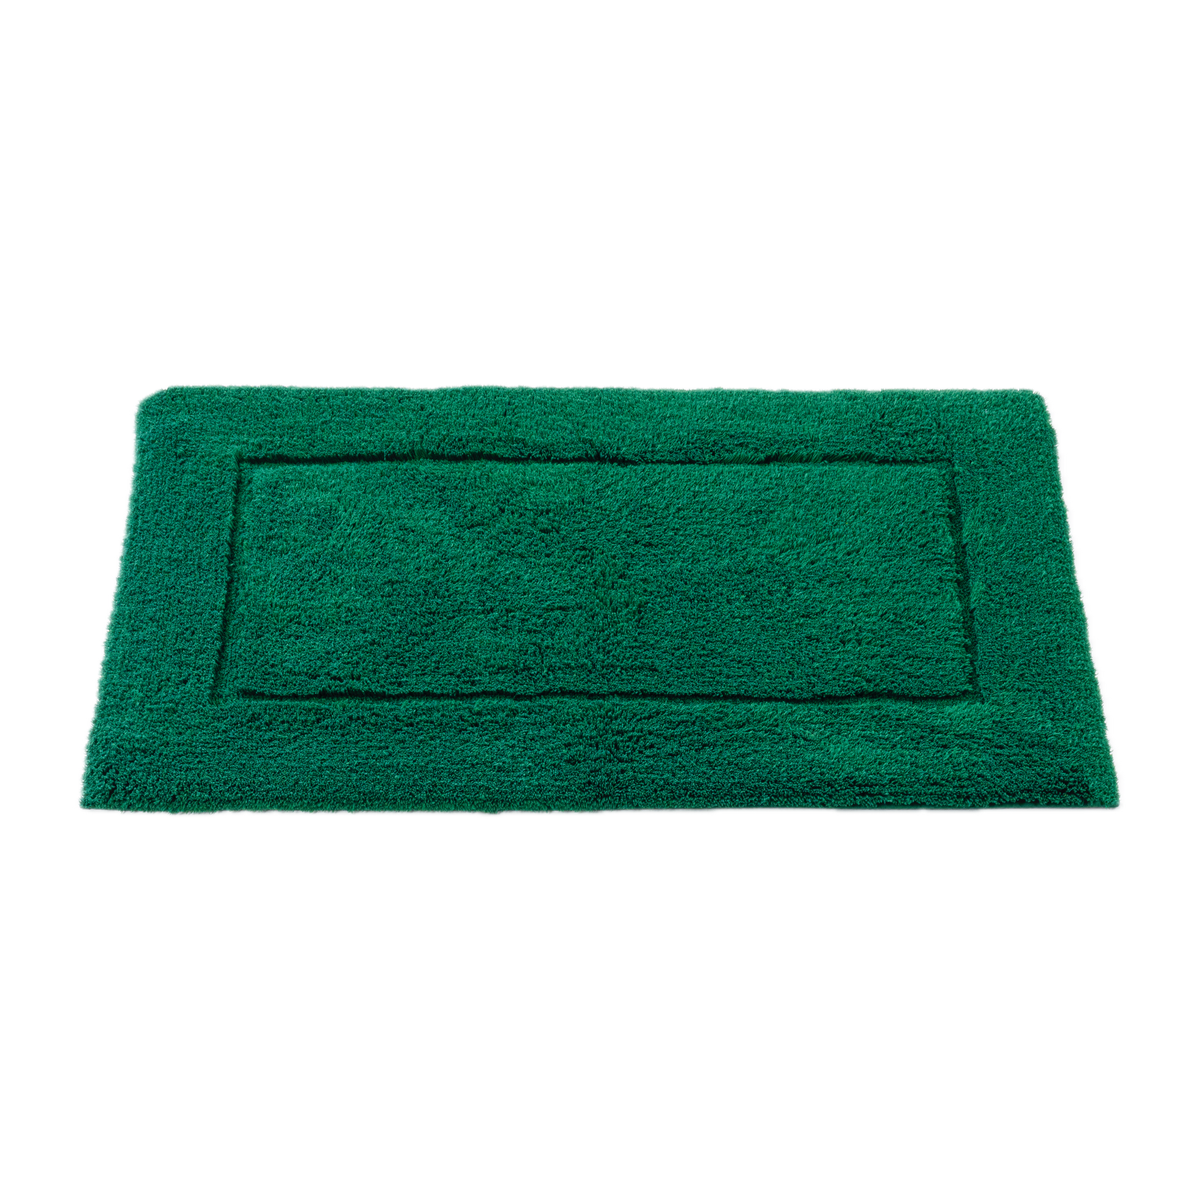 Tilted View of Abyss Habidecor Must Bath Rug in British Green Color